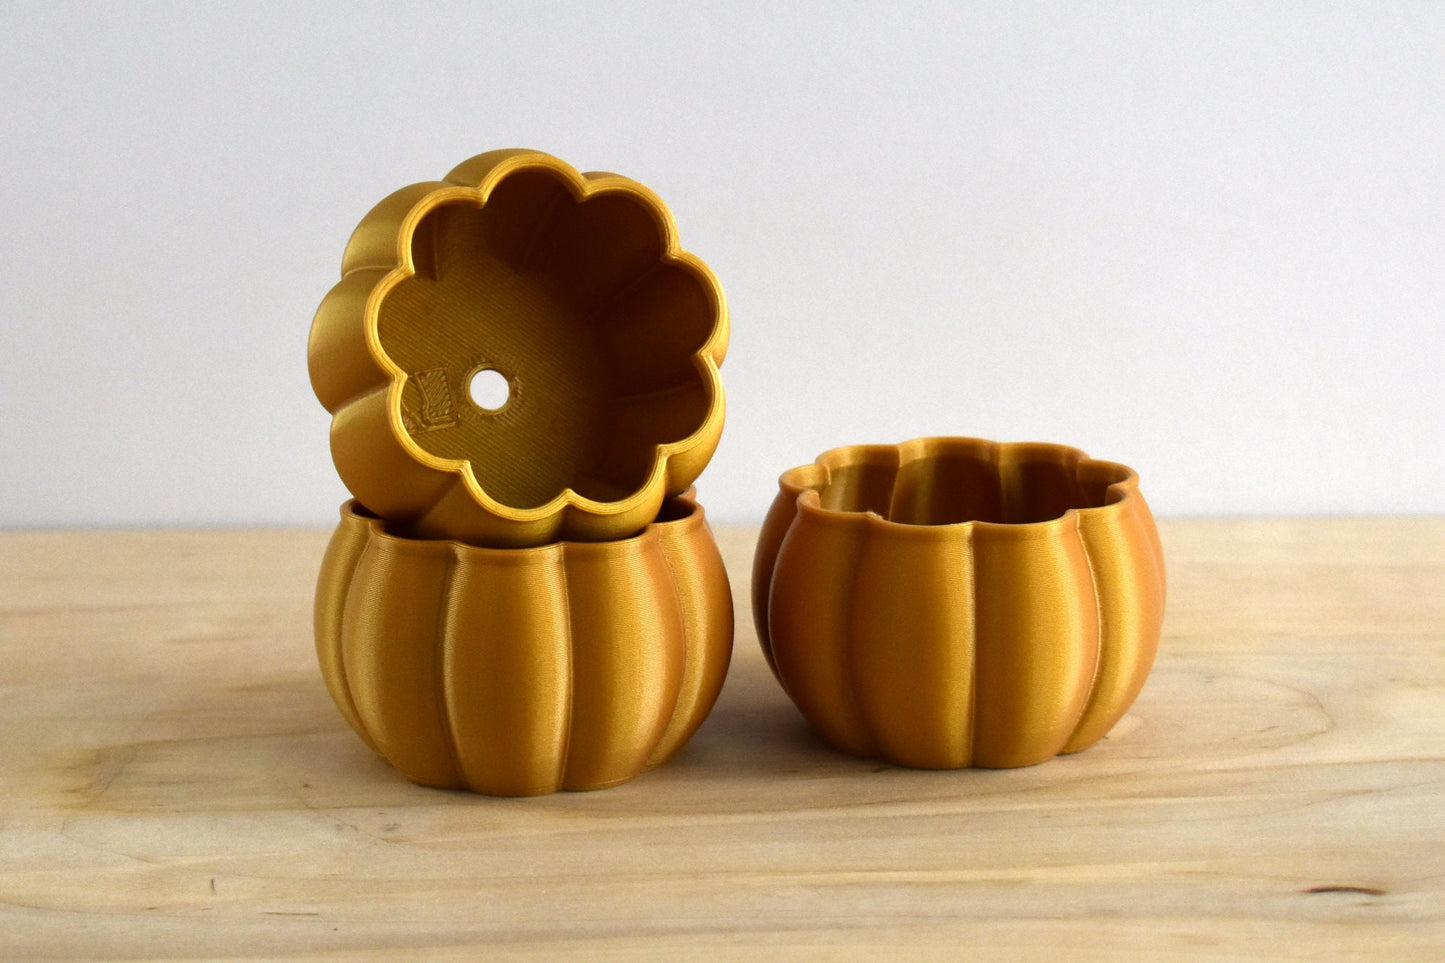 Set of 3 Mini Pumpkin Planters, Indoor or Outdoor For Weddings, Baby Showers, and Fall Events